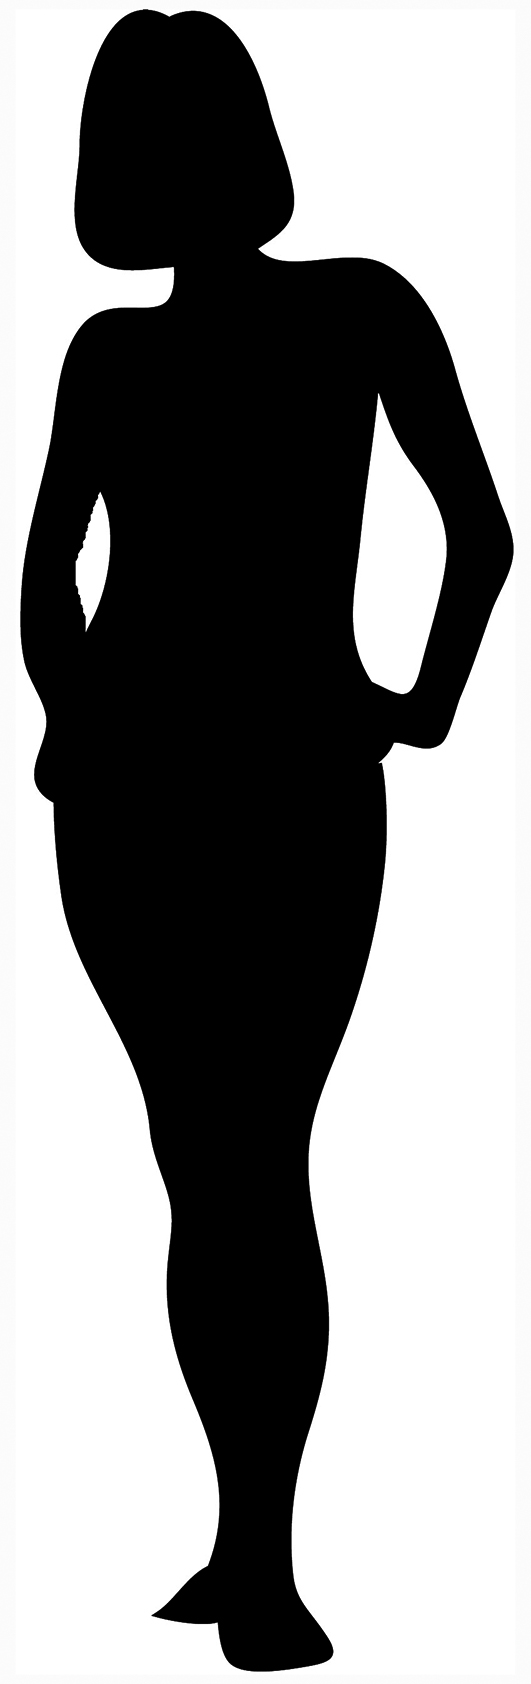 Woman Silhouette Black Outline Female Chubby Woman Silhouette Black